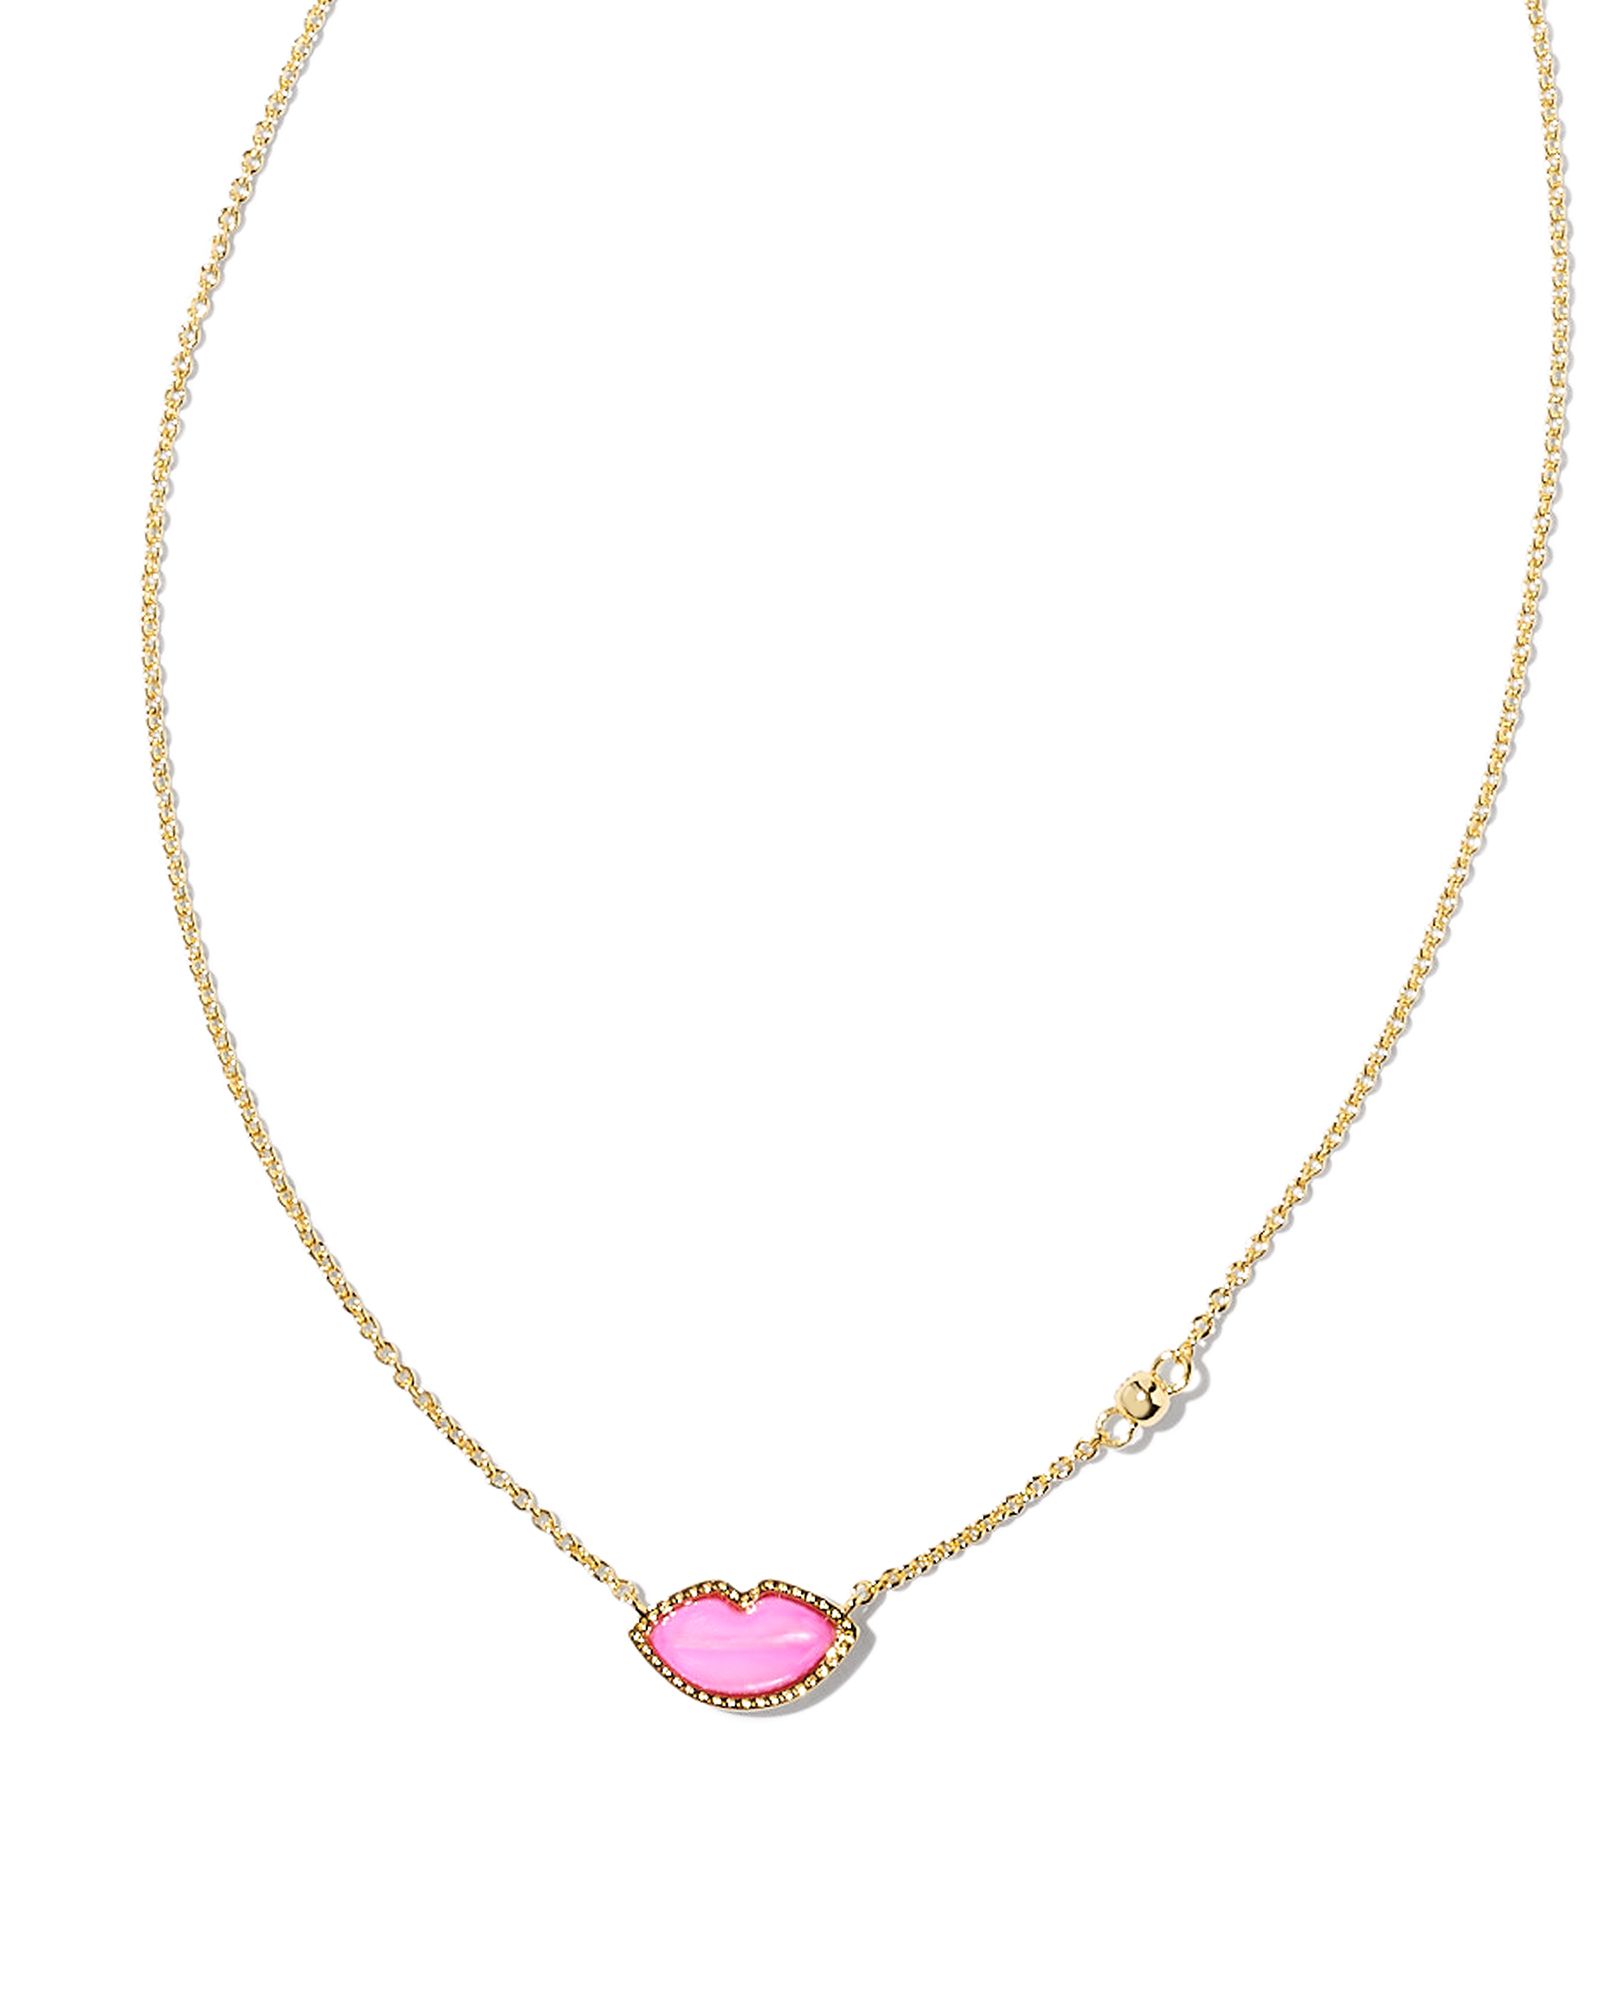 Lips Gold Pendant Necklace in Hot Pink Mother-of-Pearl | Kendra Scott | Kendra Scott